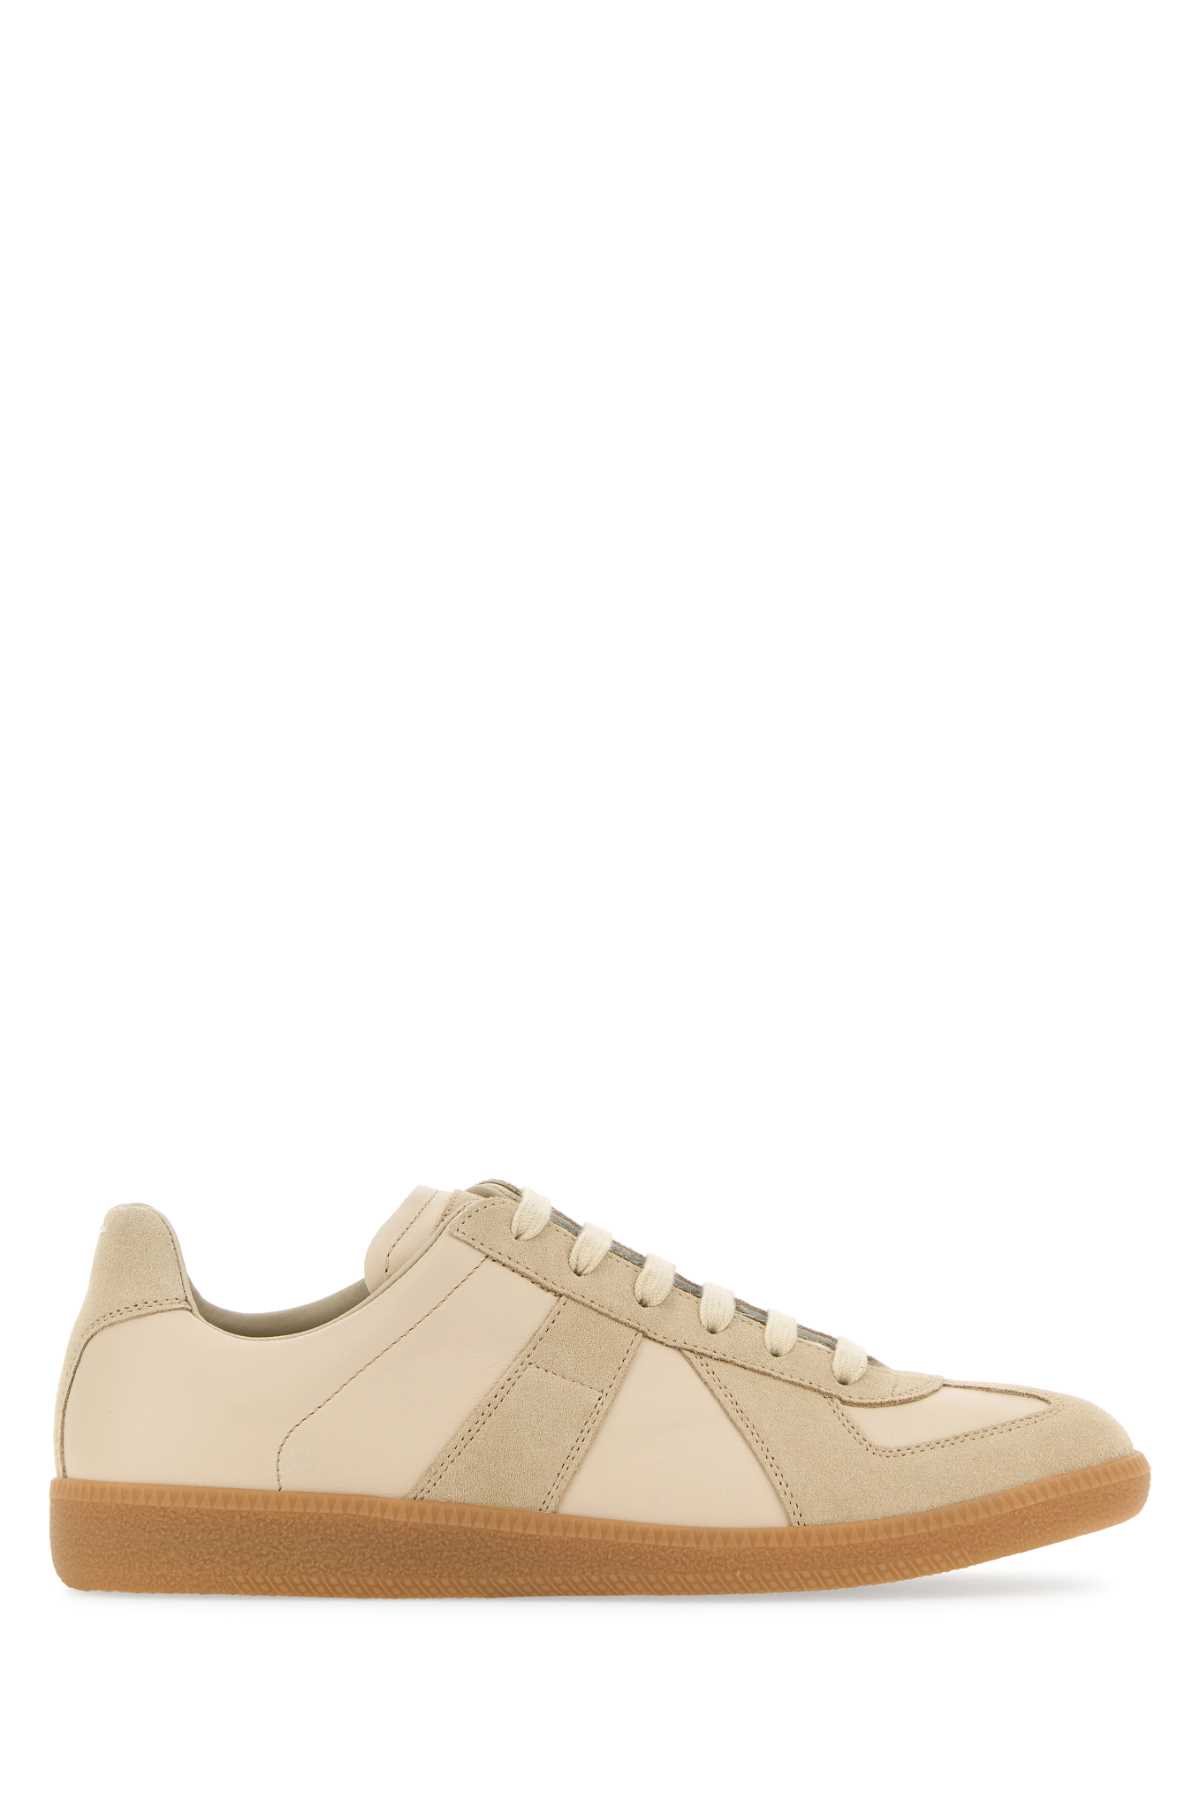 Maison Margiela Two-tone Leather And Suede Replica Sneakers In Lambpapyrus